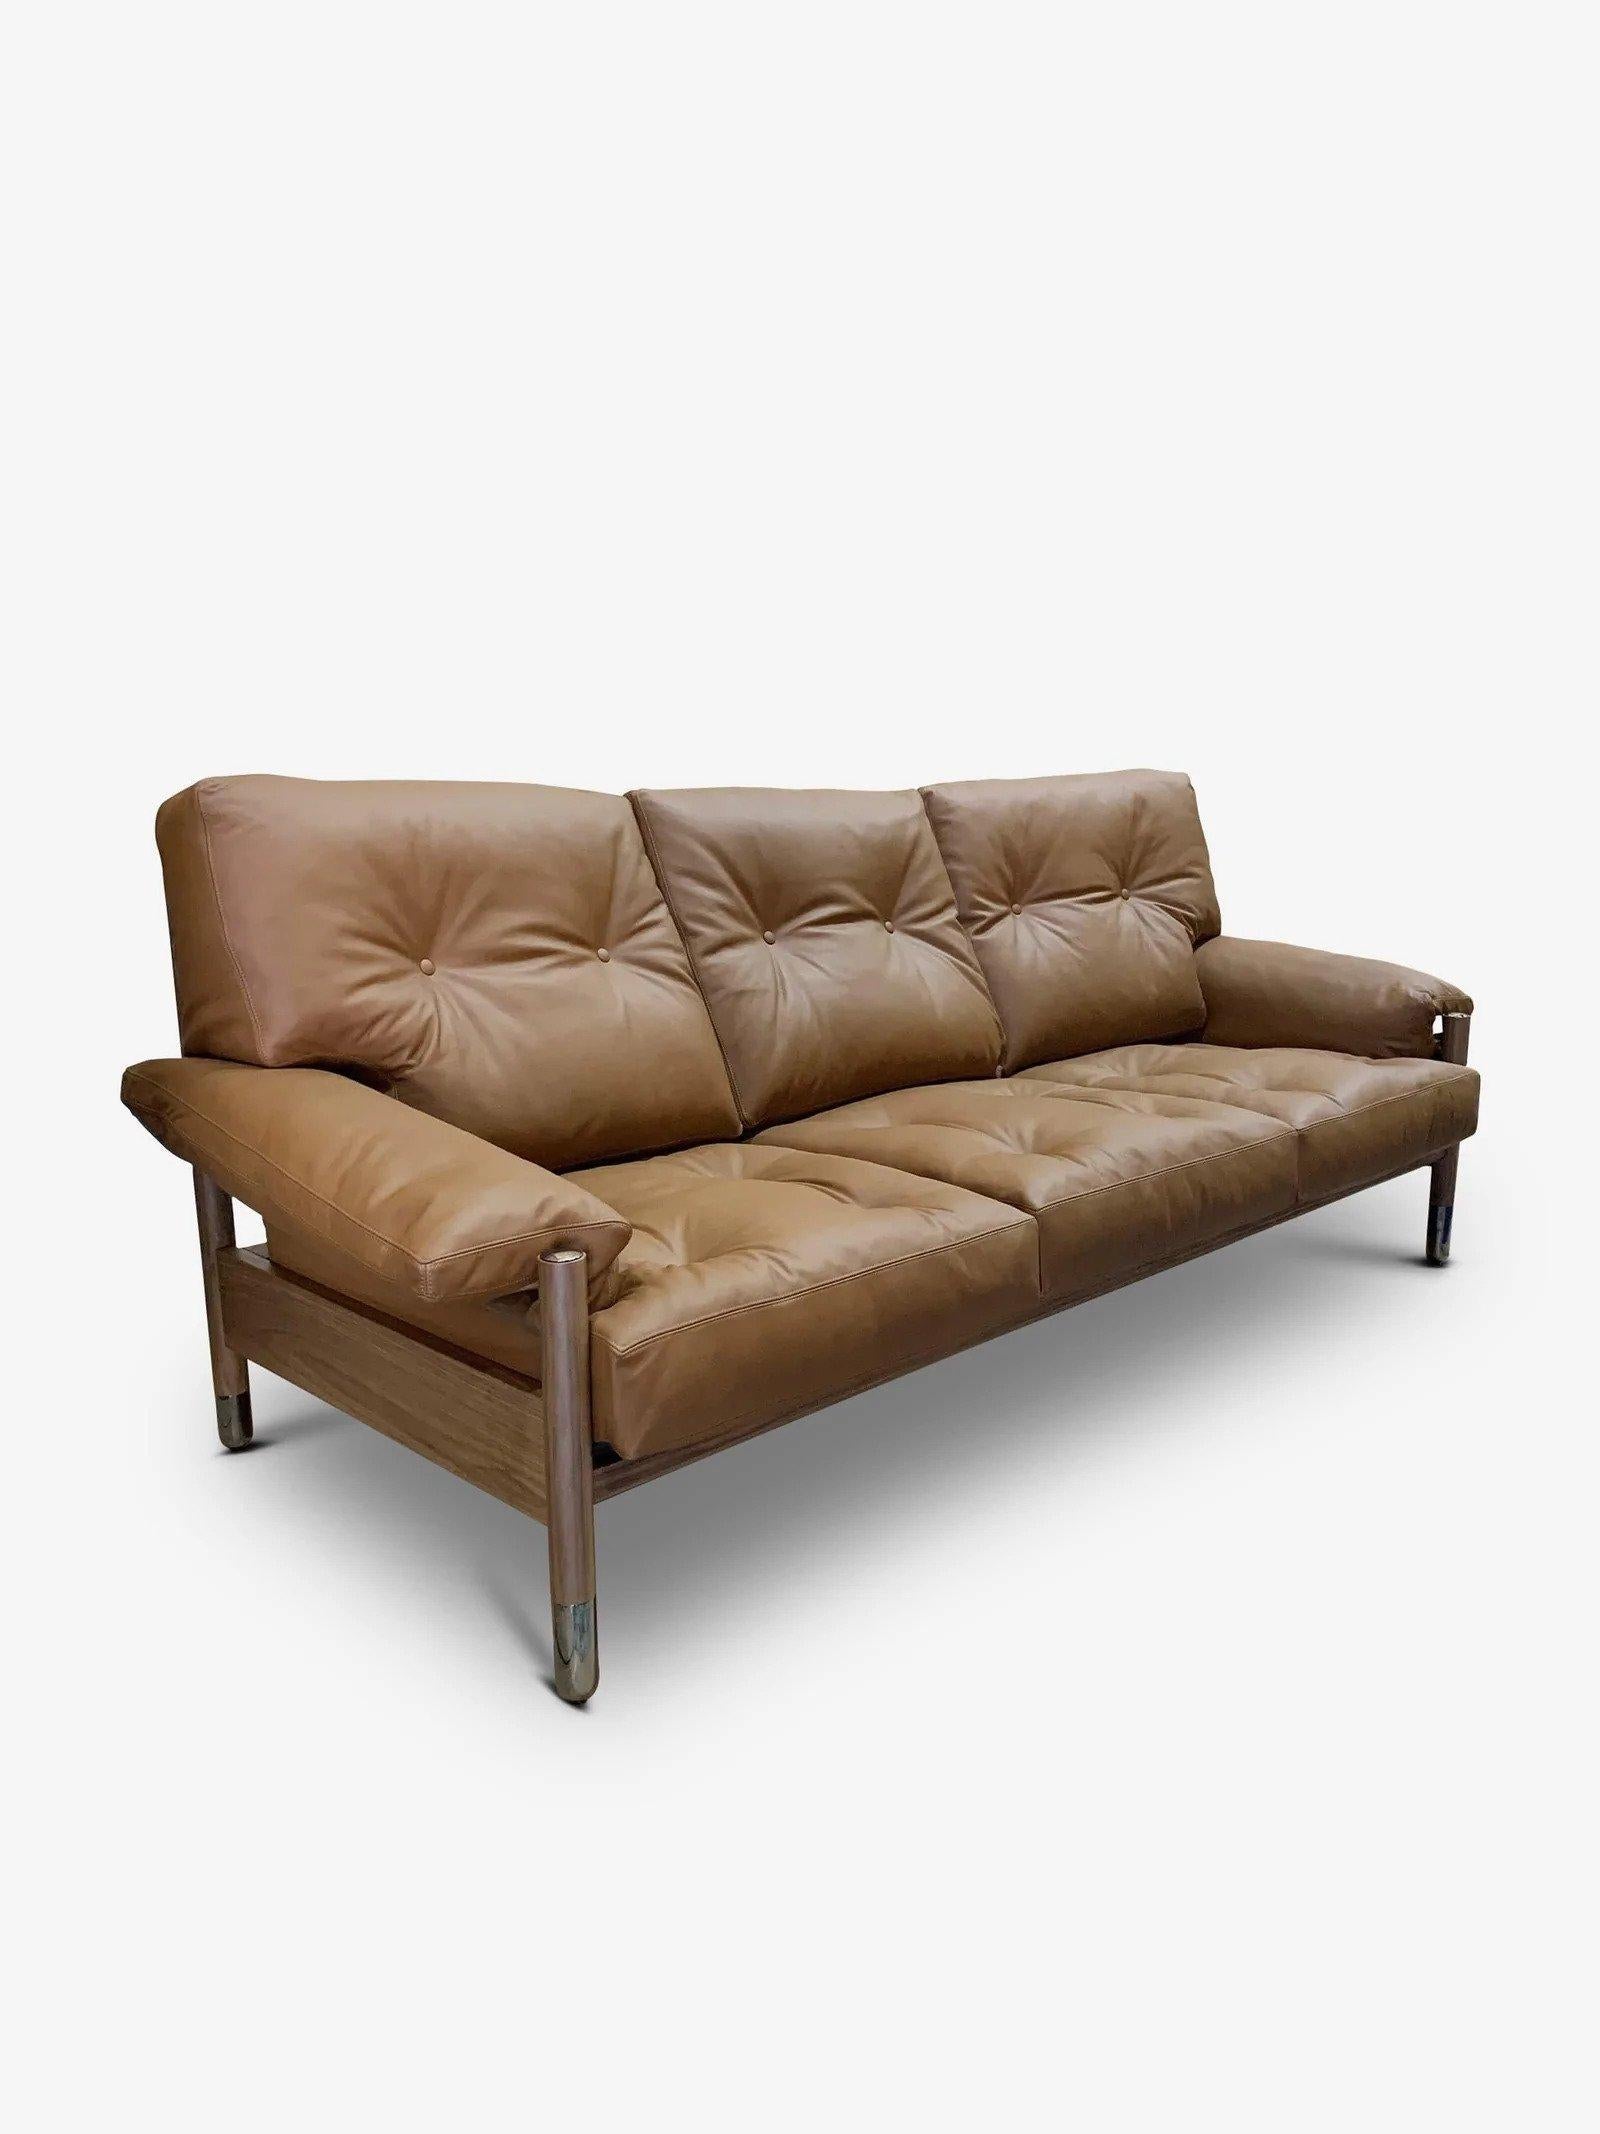 Sella Sofa In New Condition For Sale In Sag Harbor, NY